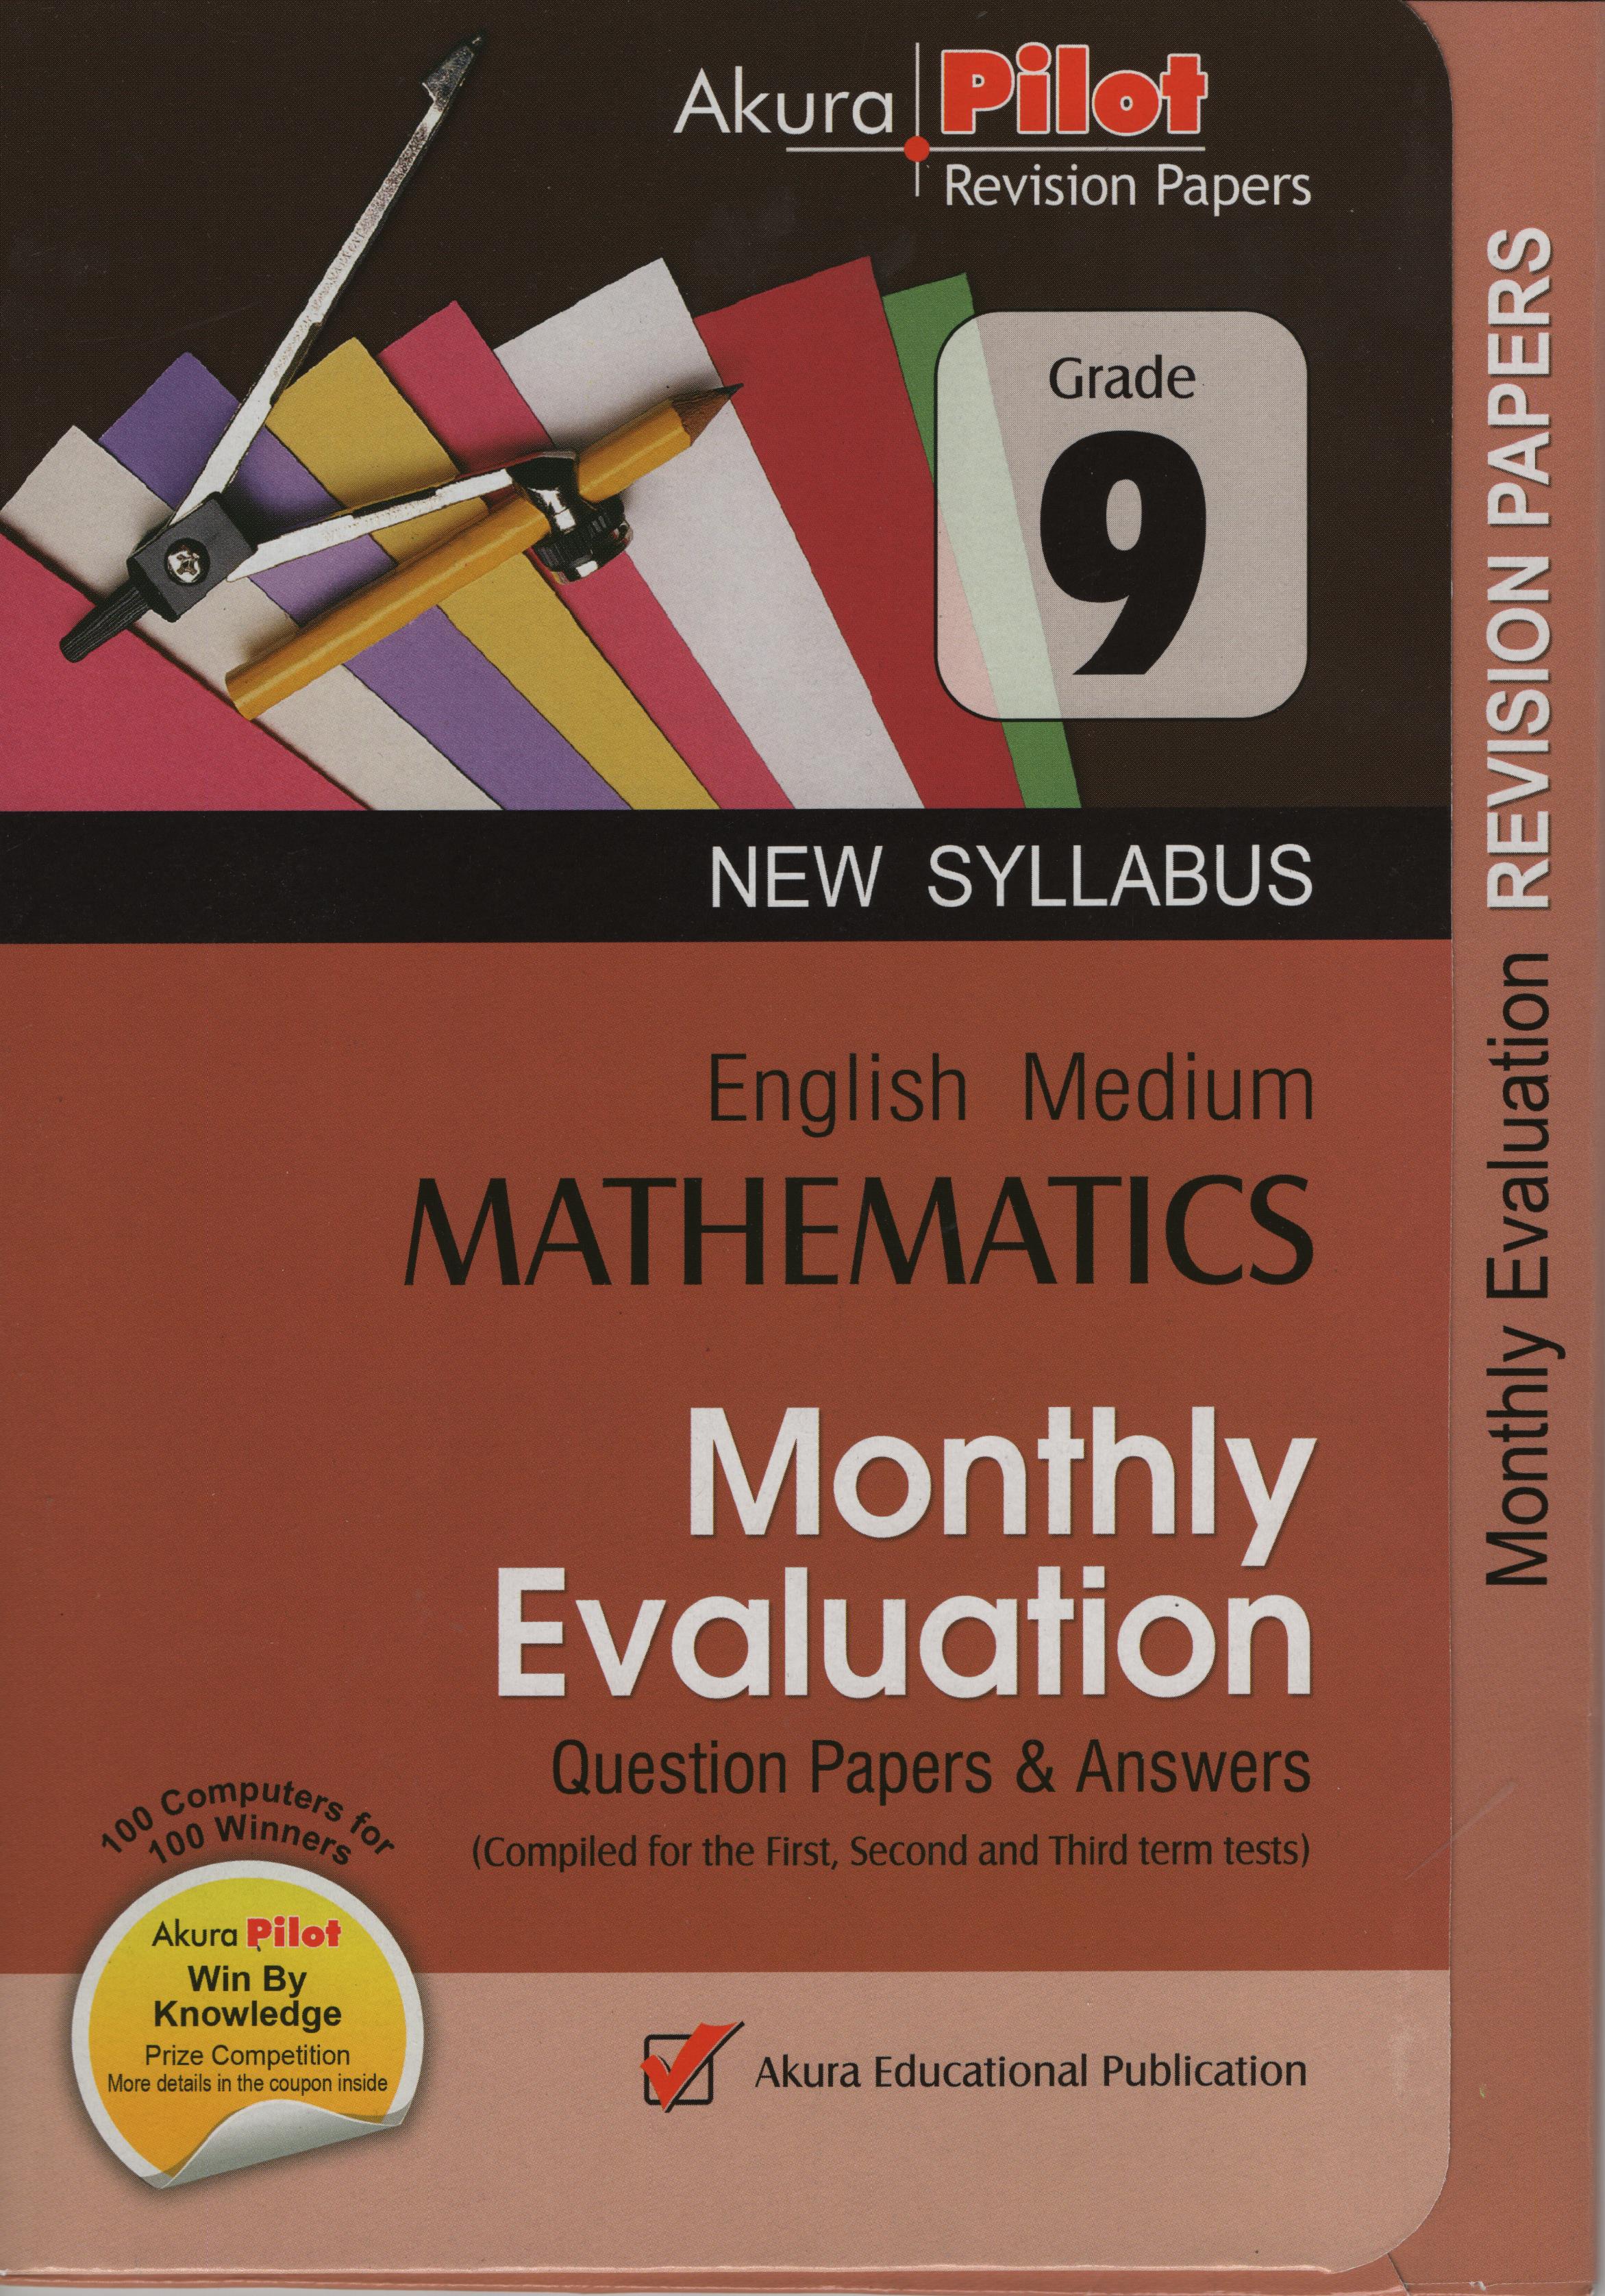 Akura Pilot Grade 9 Mathematics : Monthly Evaluation Question Papers and Answers (New Syllabus) E/M